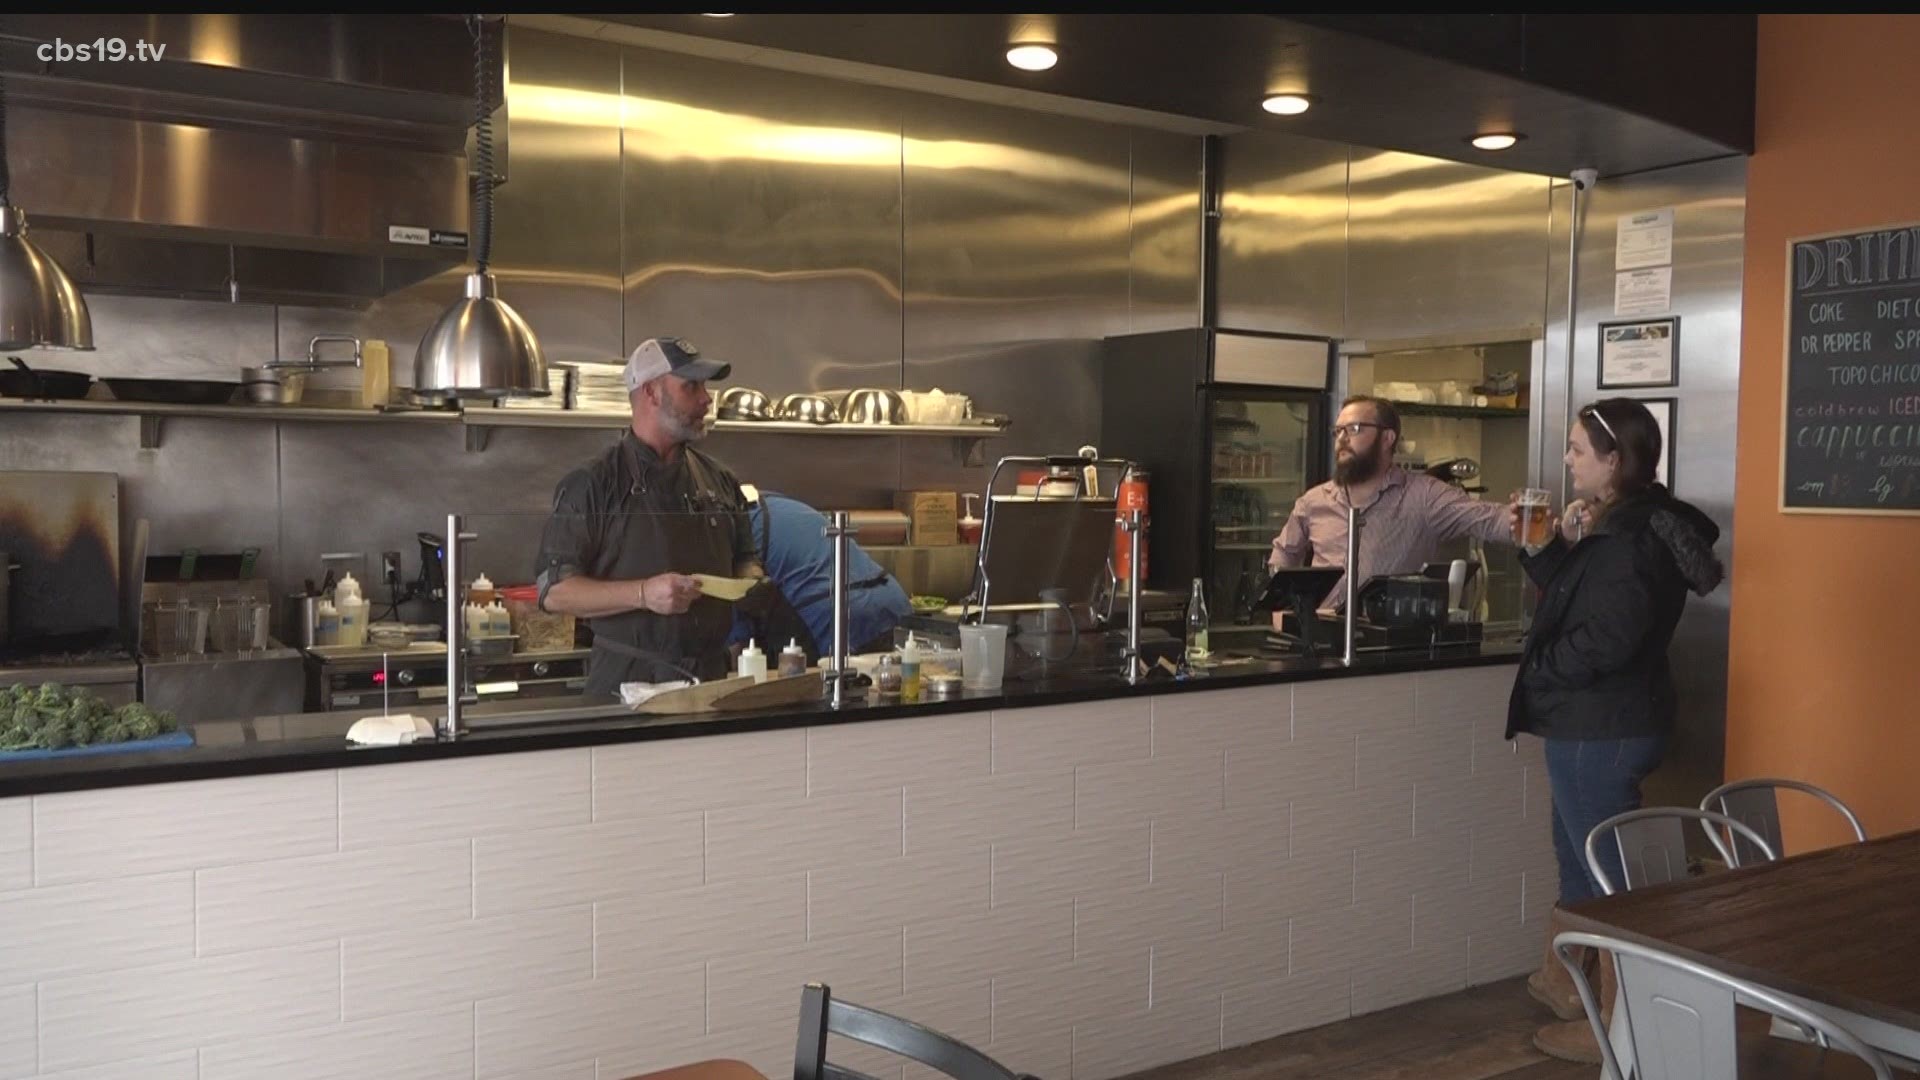 After a year of COVID-19, East Texas is finally getting back to normal – but restaurants are still dealing with a crisis on several fronts.